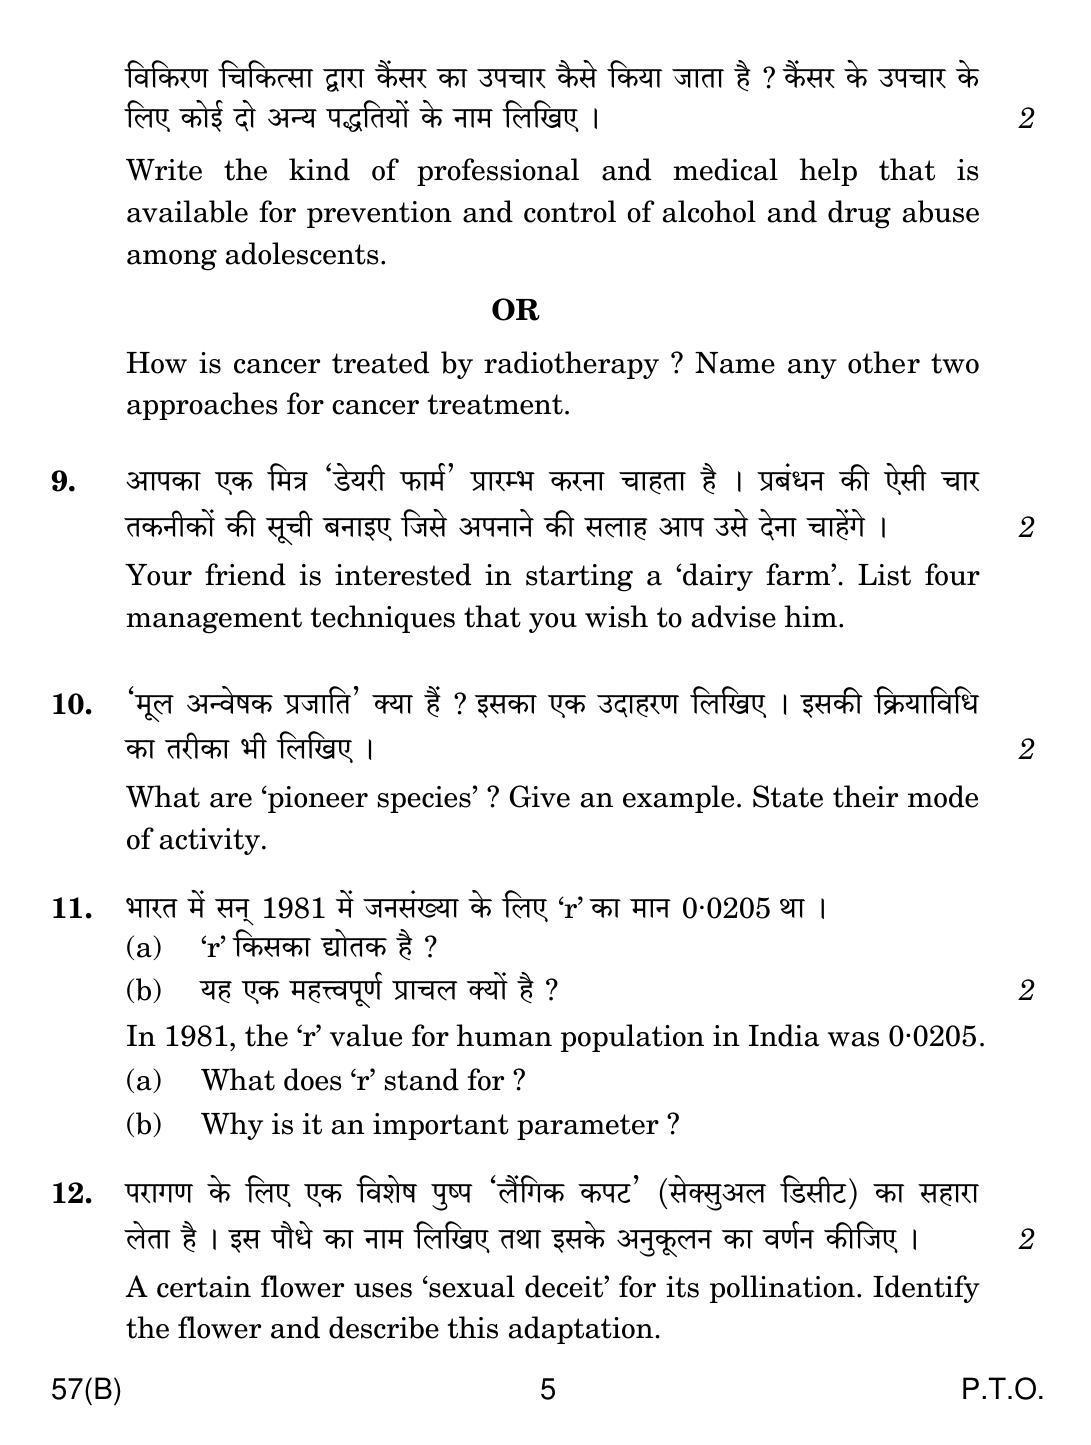 CBSE Class 12 57(B) Biology For Blind 2019 Question Paper - Page 5